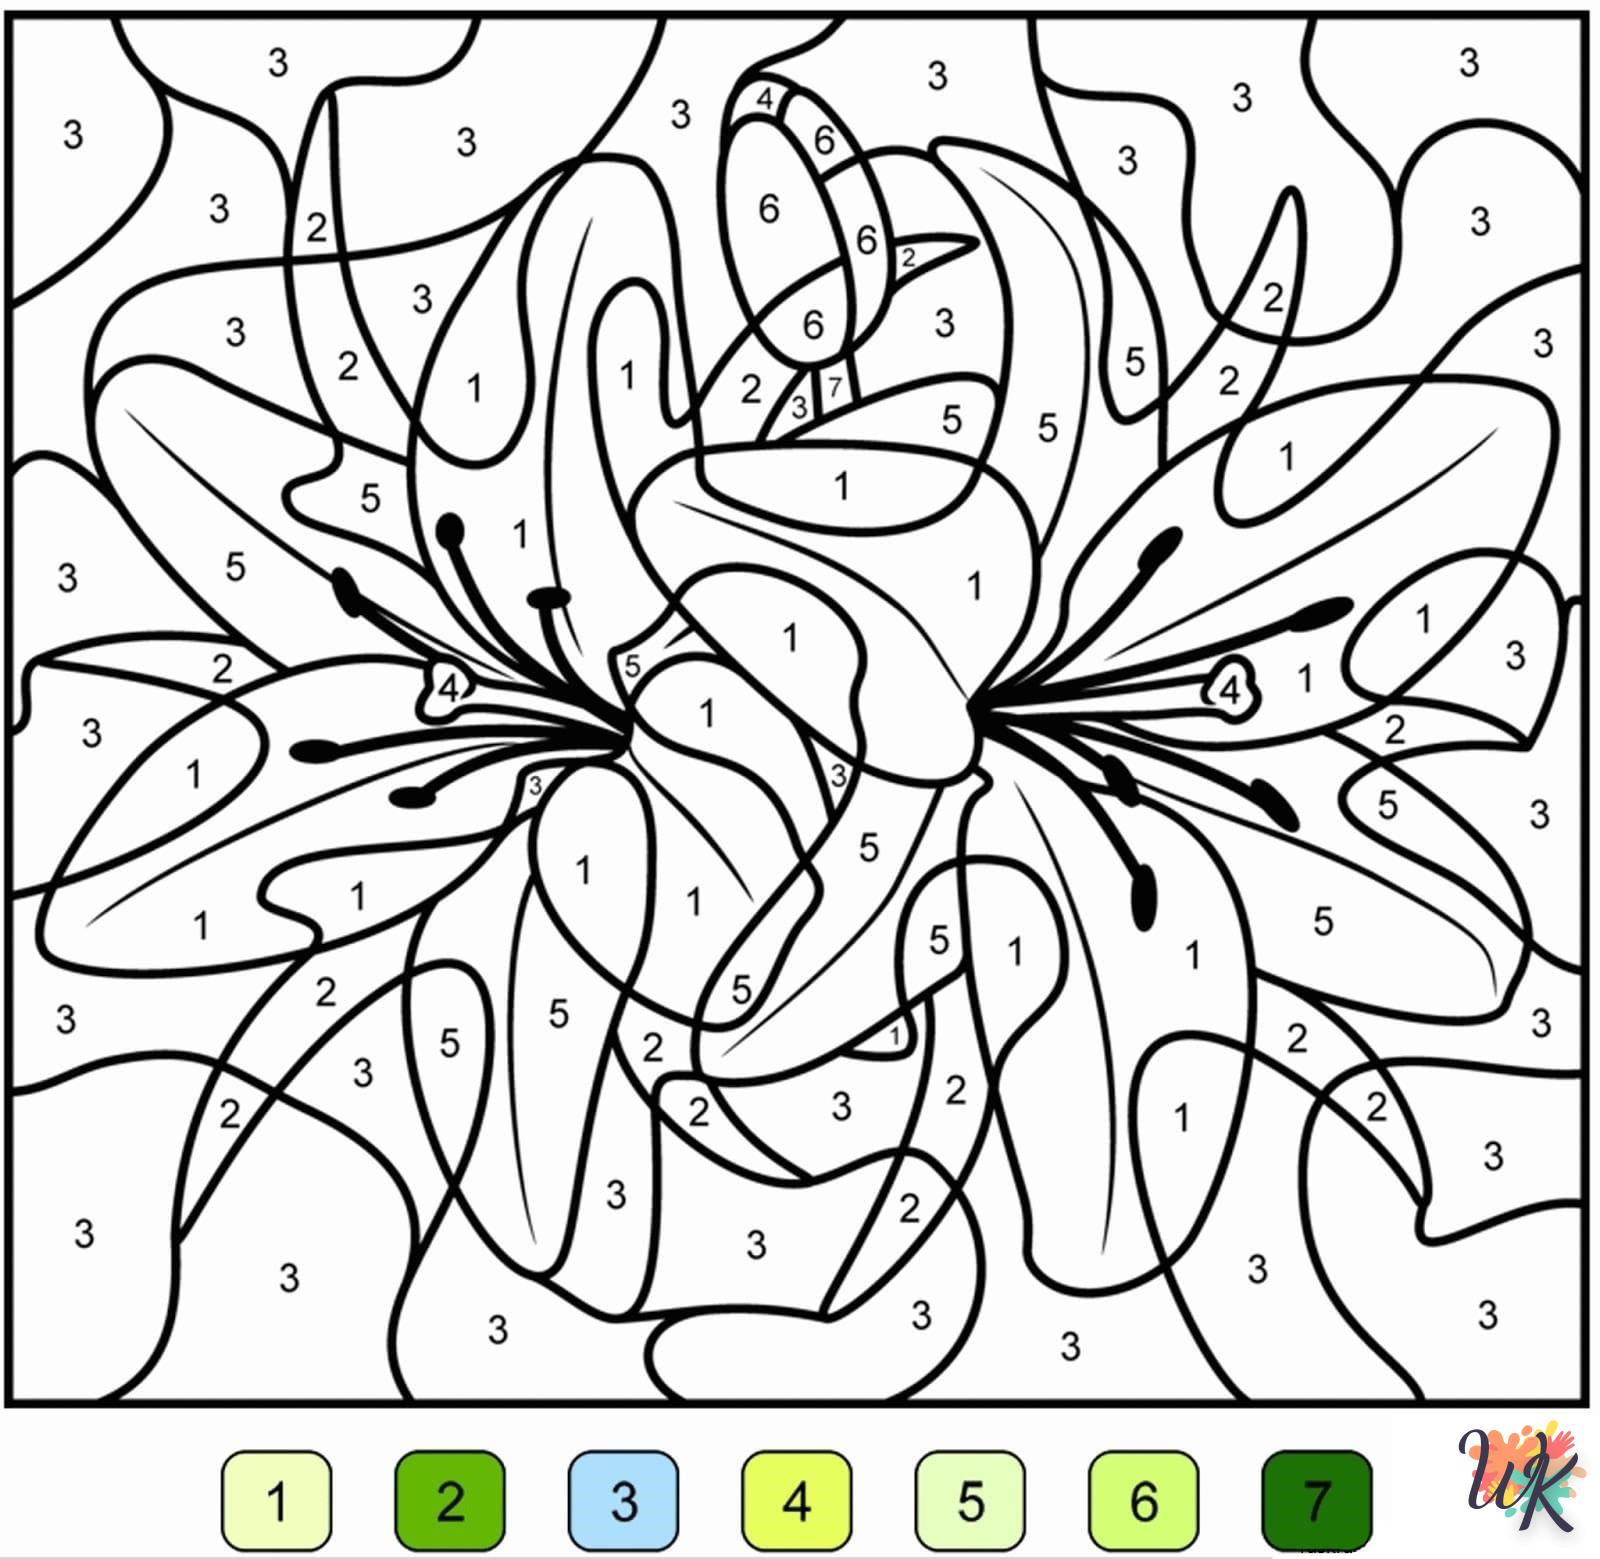 Magic coloring online free for 12 year olds